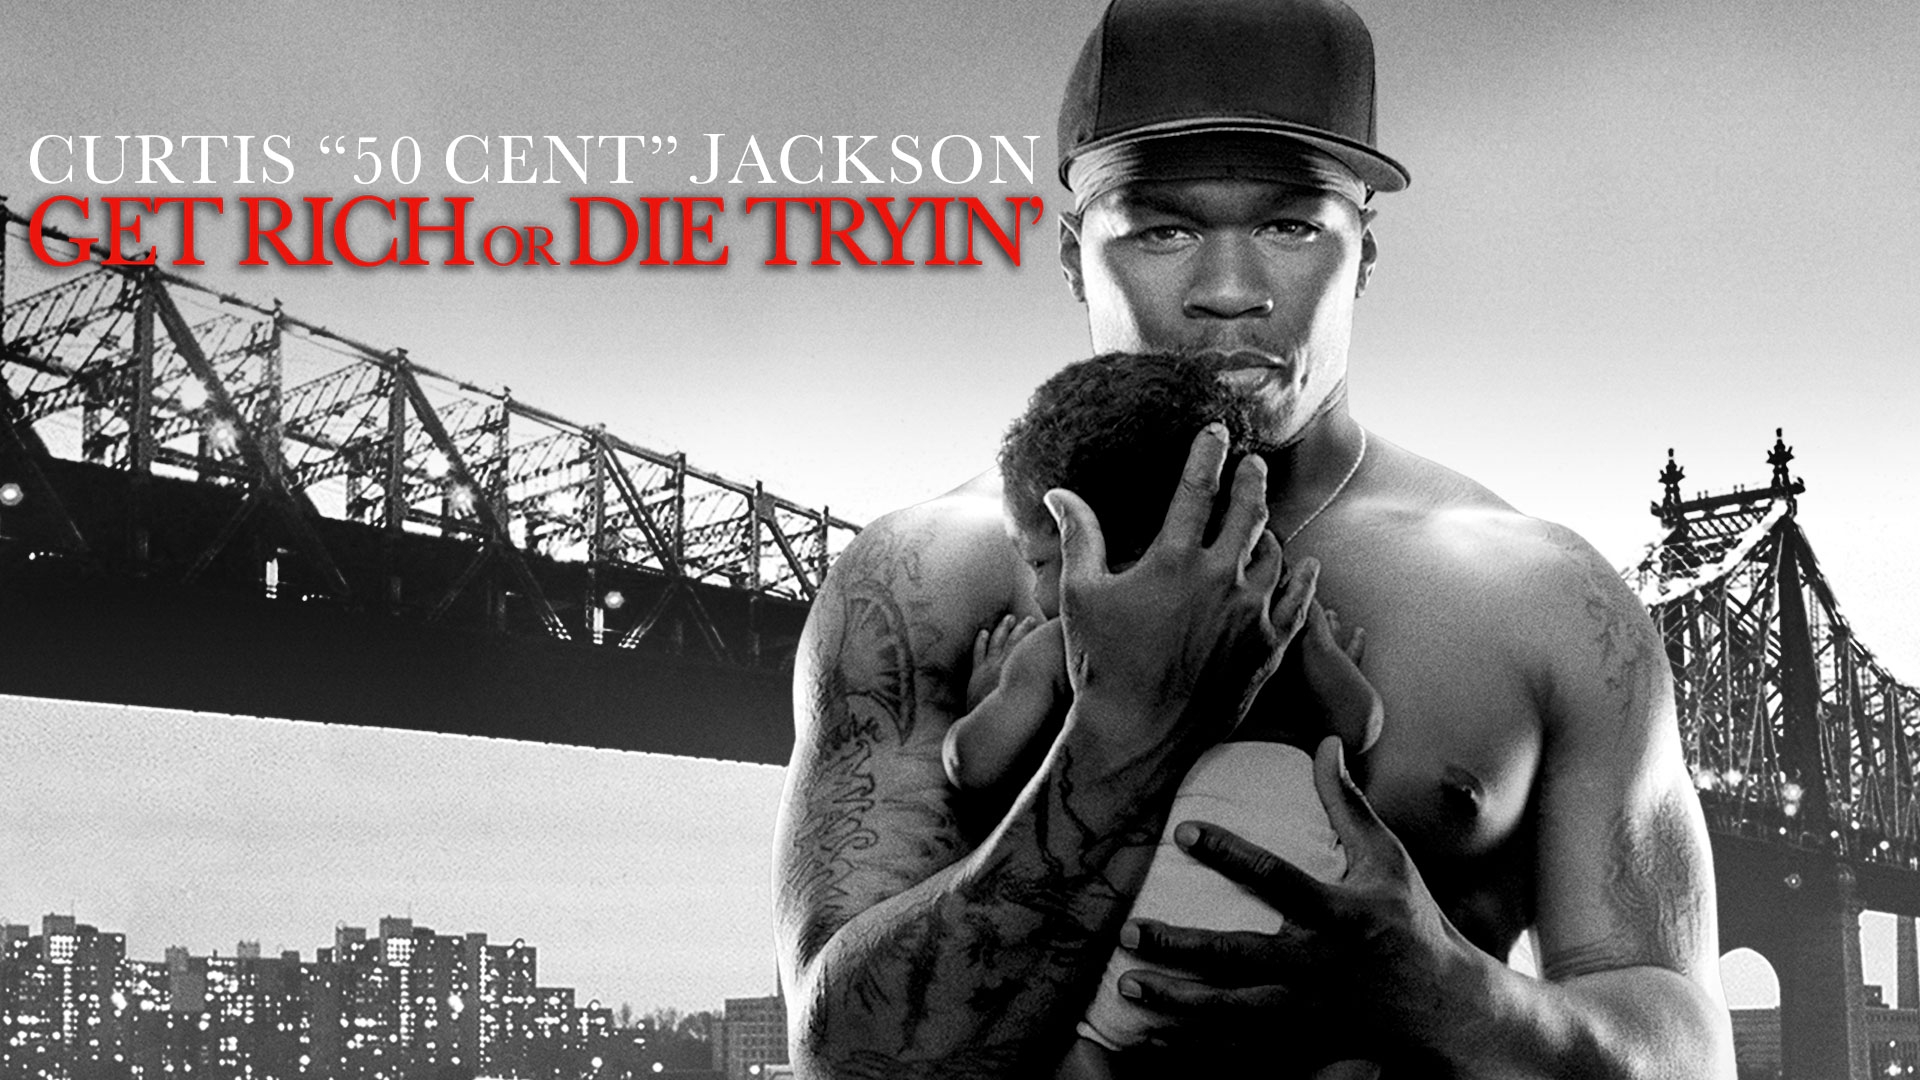 Get rich or die tryin Poster for Sale by EyJumpman  Redbubble